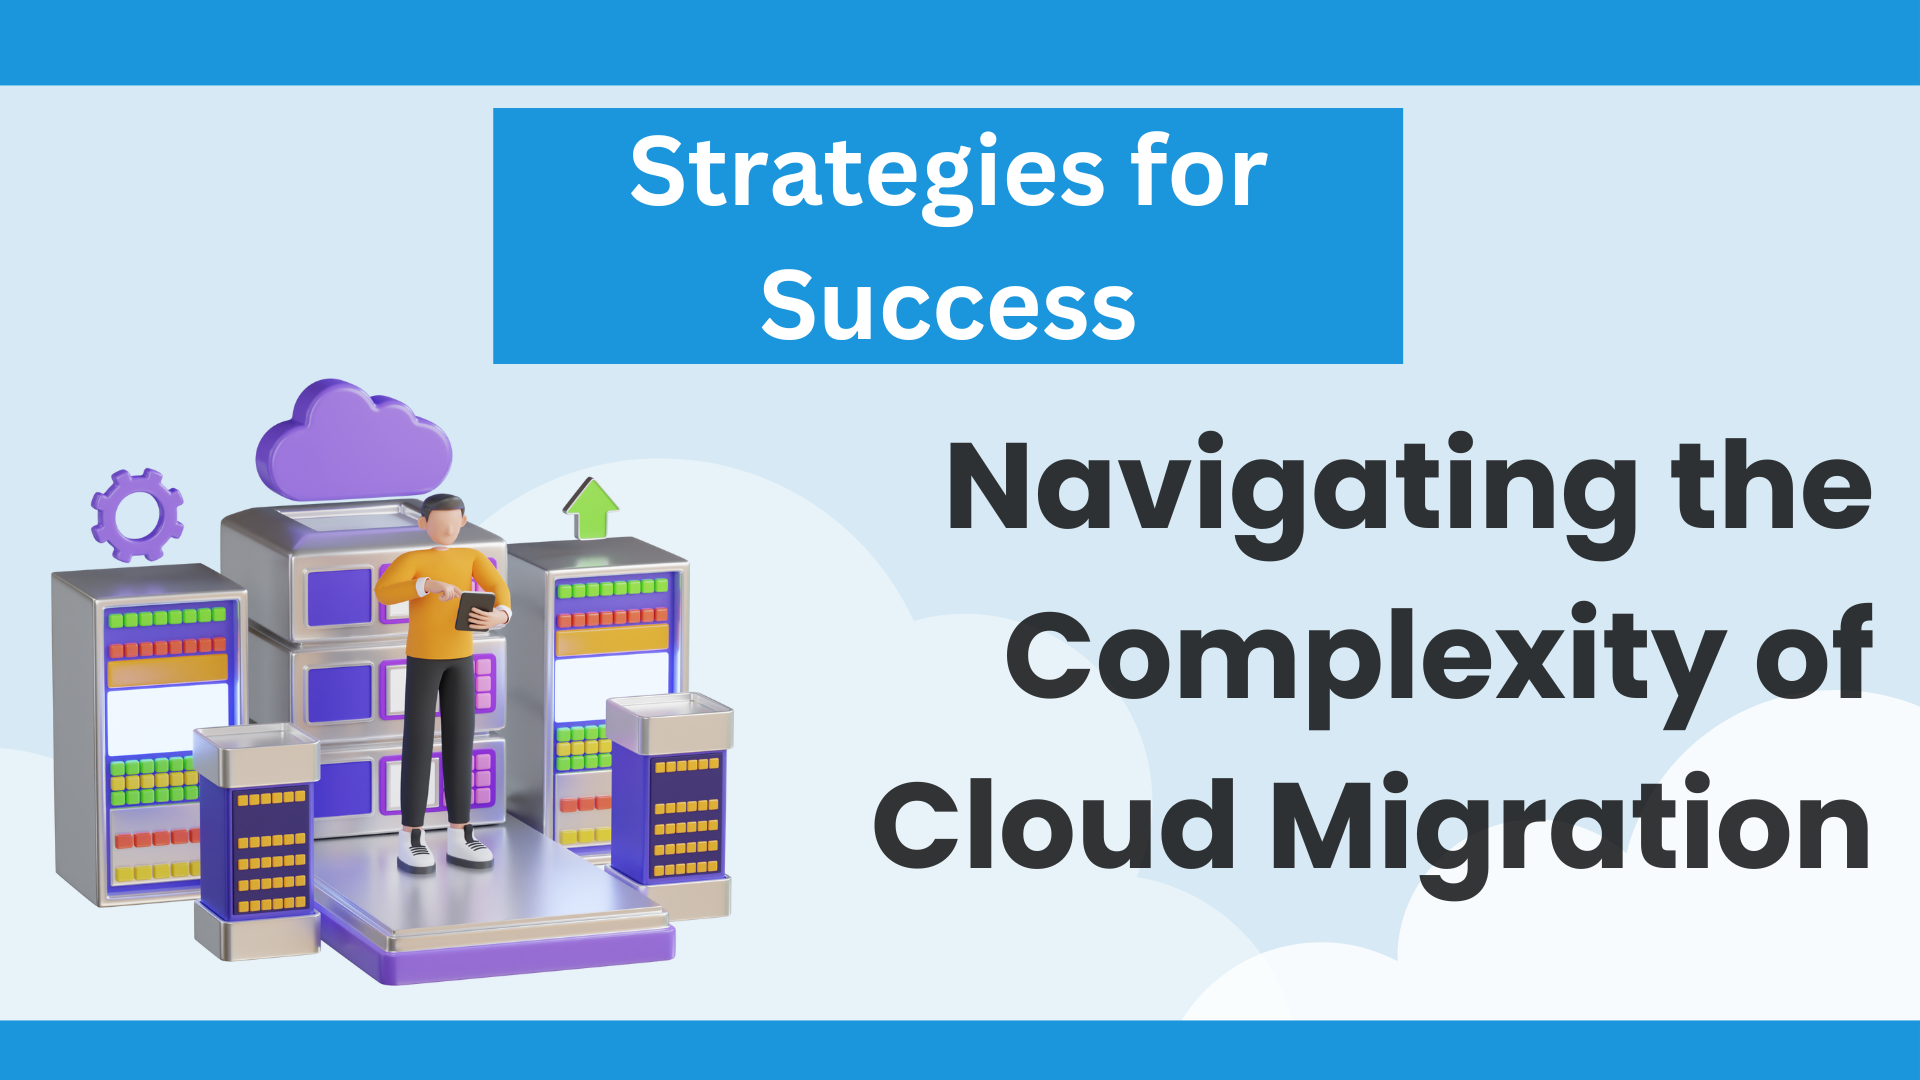 Navigating the Complexity of Cloud Migration: Strategies for Success